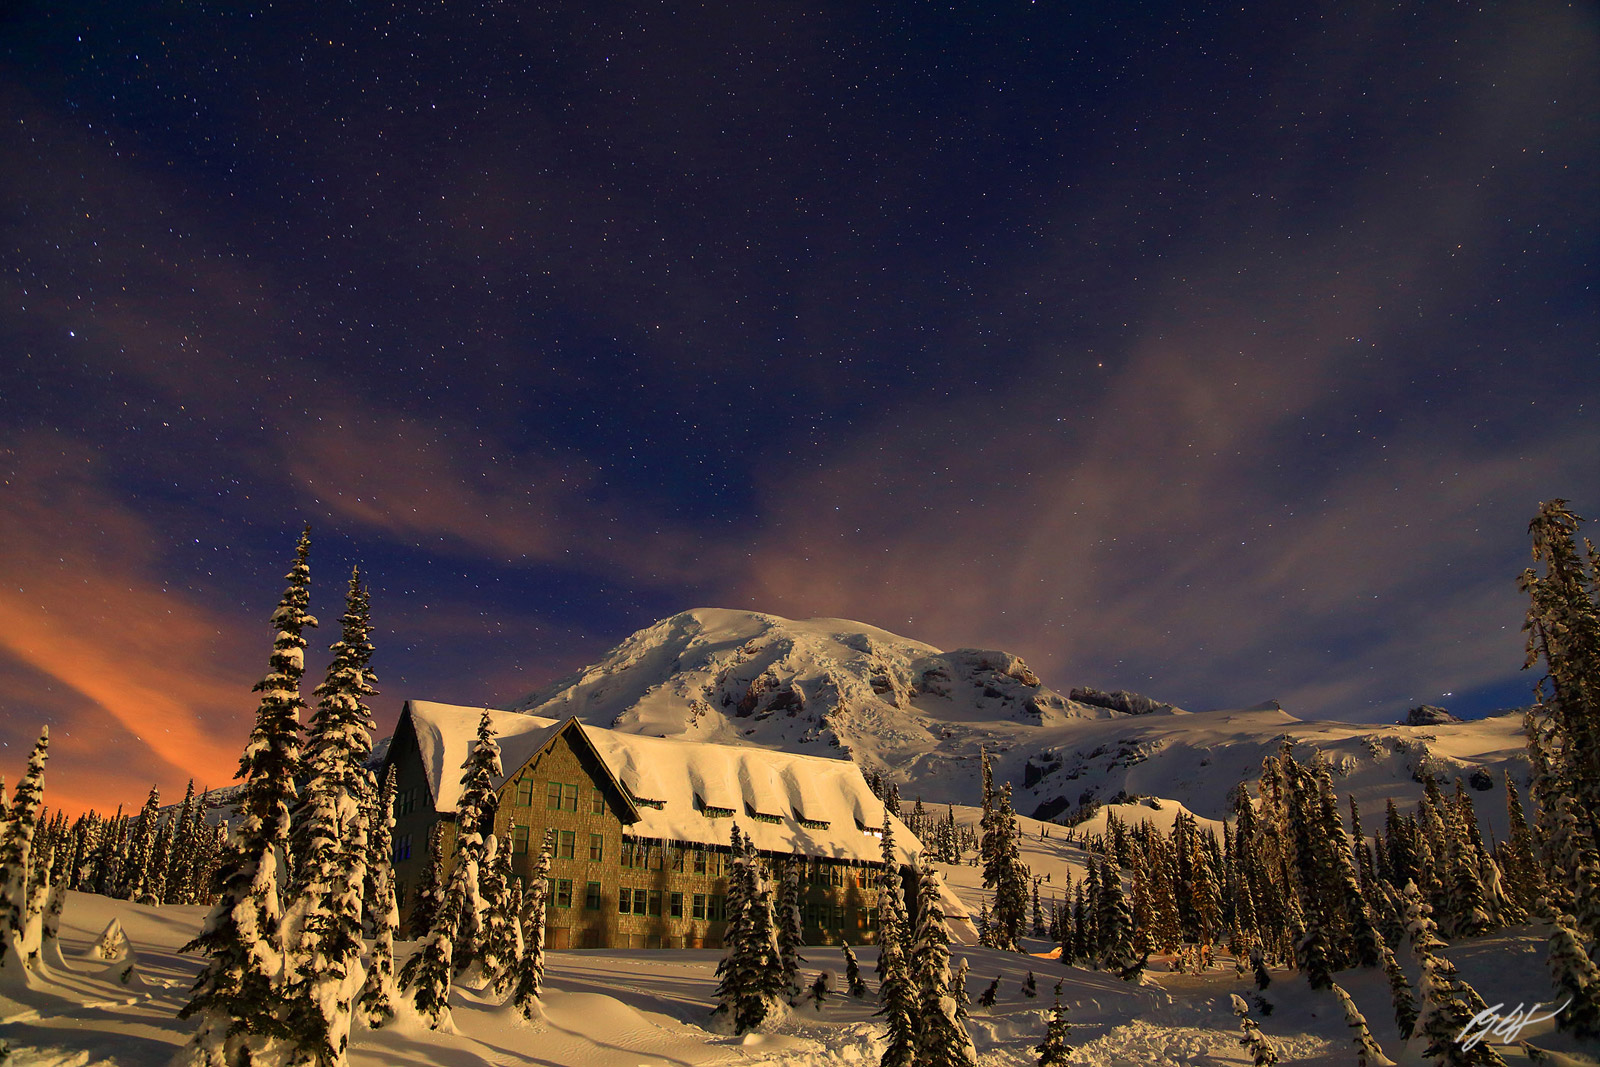 Winter Scene with the Paradise Lodge and Stars at Night in Mt Rainier National Park in Washington